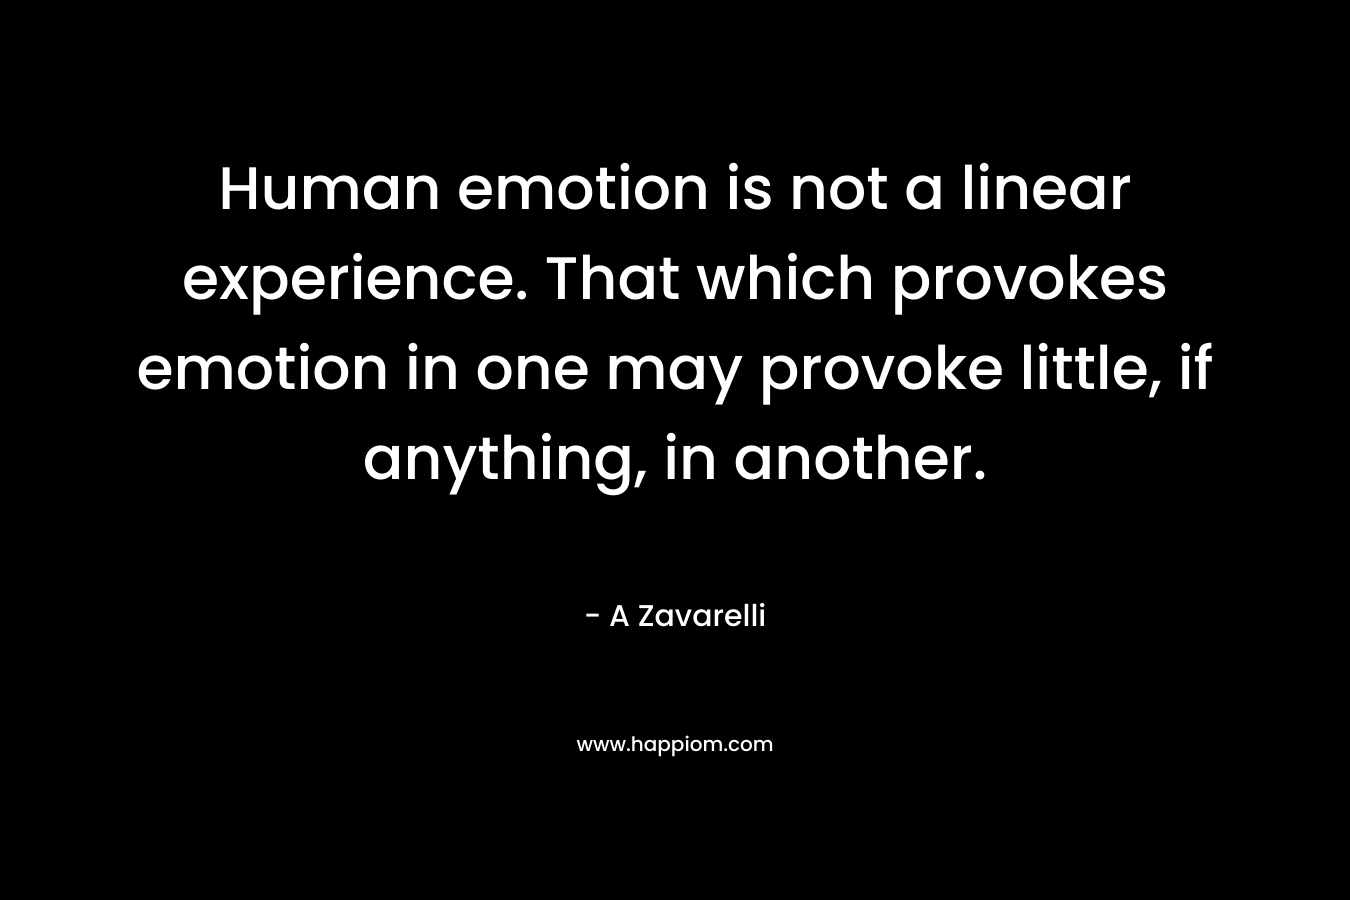 Human emotion is not a linear experience. That which provokes emotion in one may provoke little, if anything, in another.